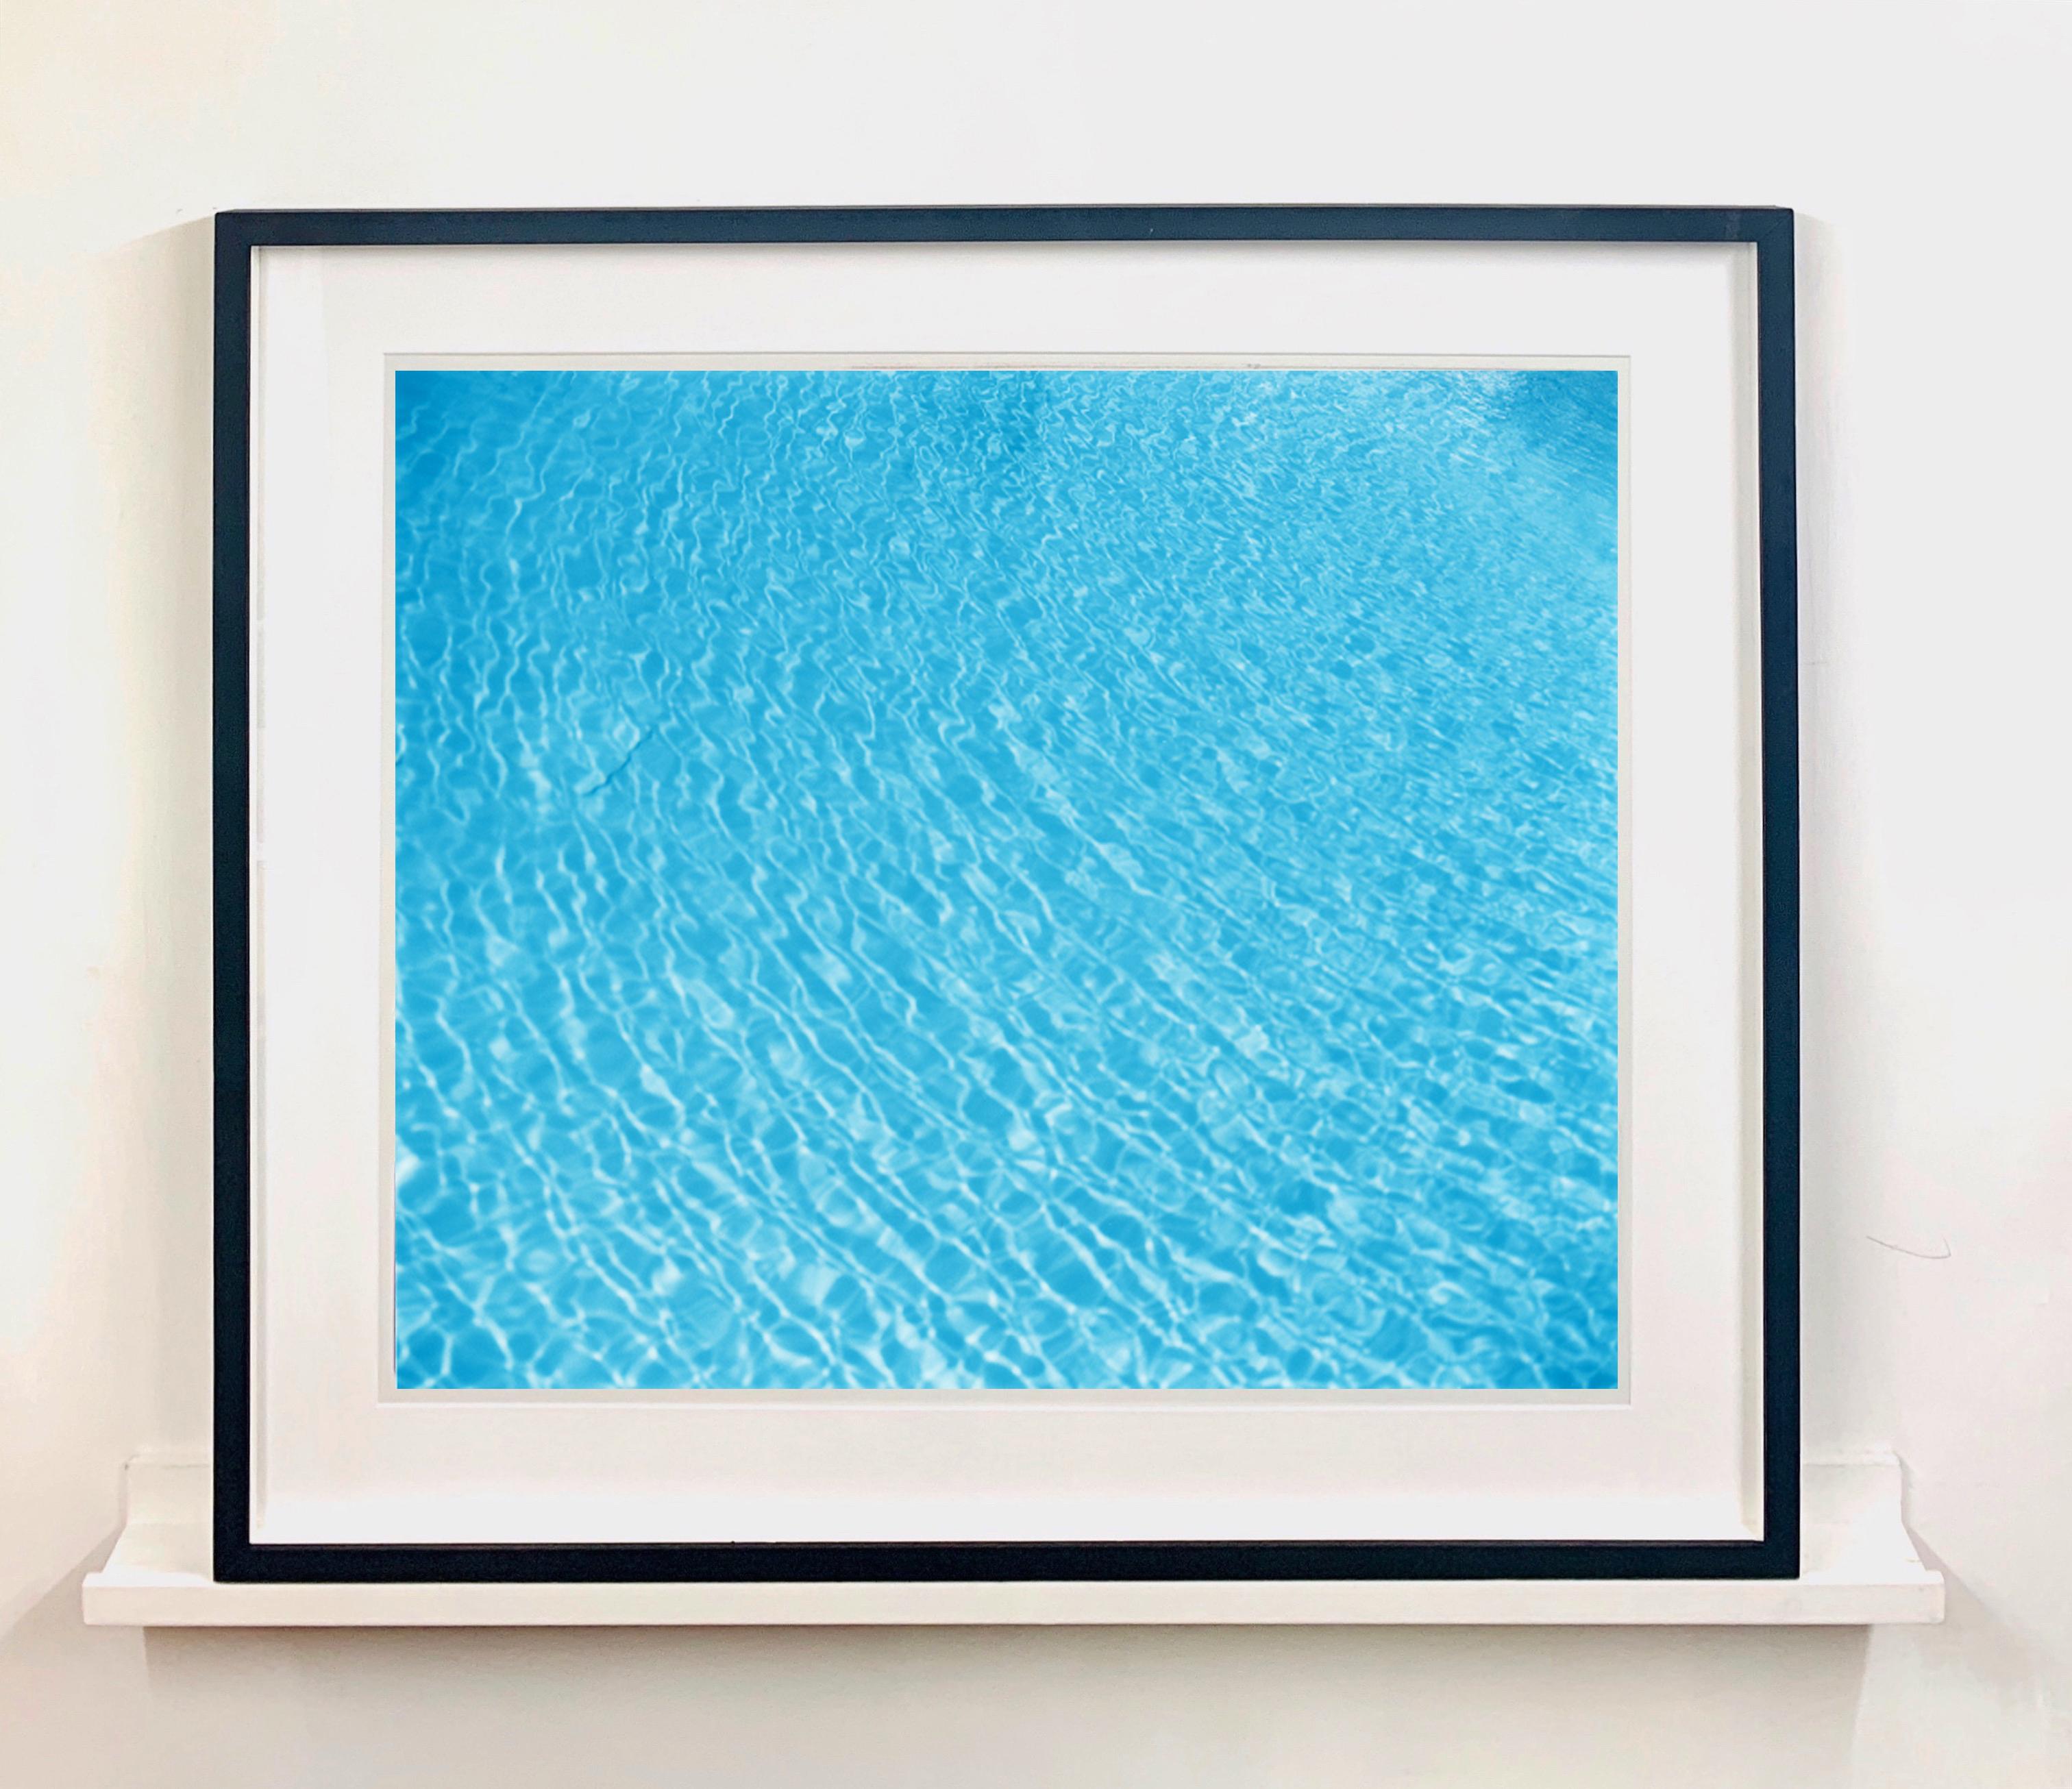 Algiers Pool, Las Vegas, Nevada - Blue water color photography - Contemporary Print by Richard Heeps